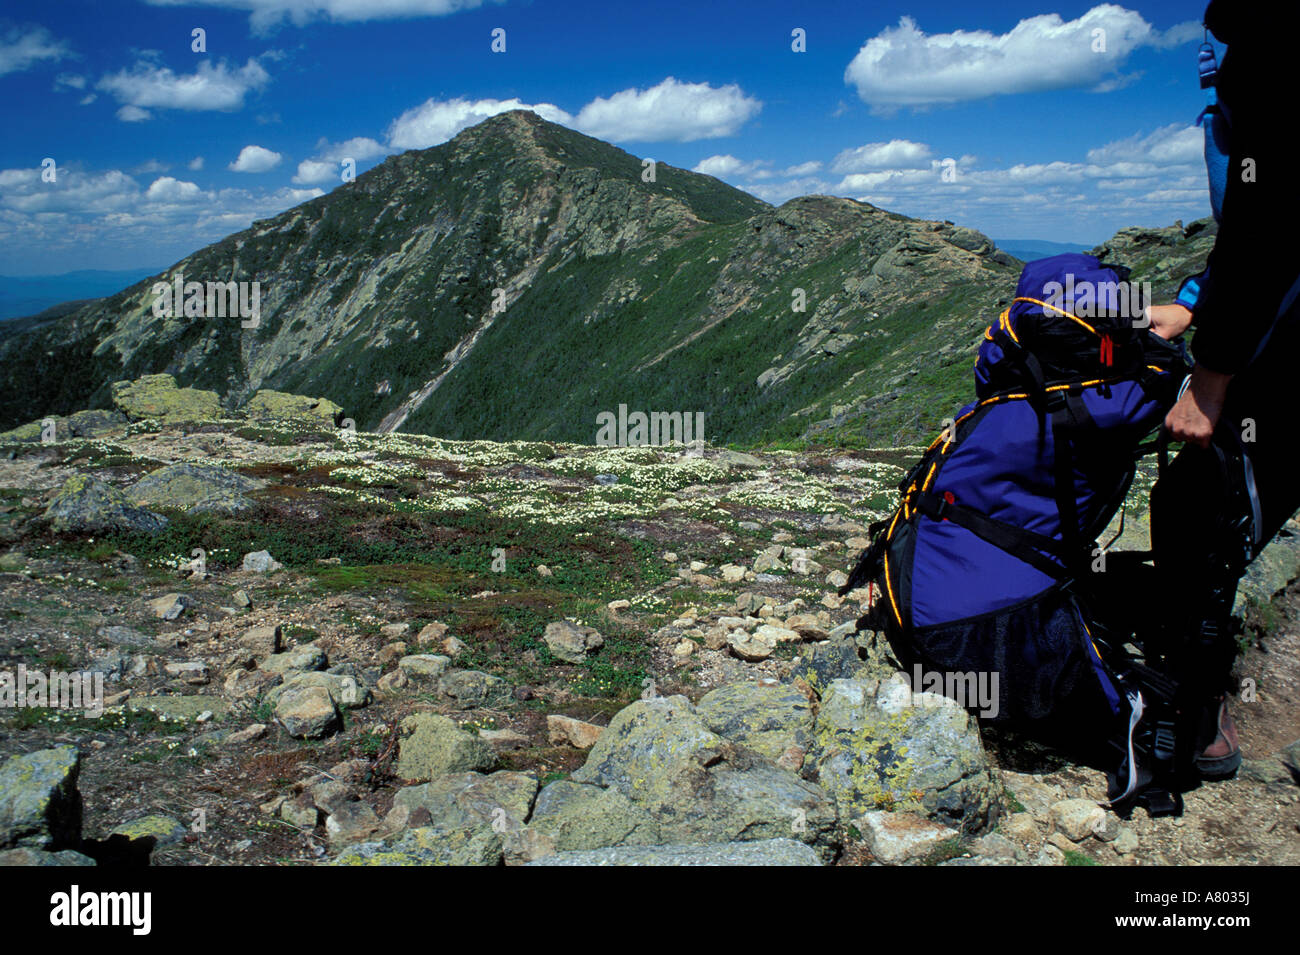 A hiker gets ready to hike to Mt. Lincoln  in the distance.   Alpine zone.  Little Haystack Mtn, White Mtns, NH (MR) Stock Photo